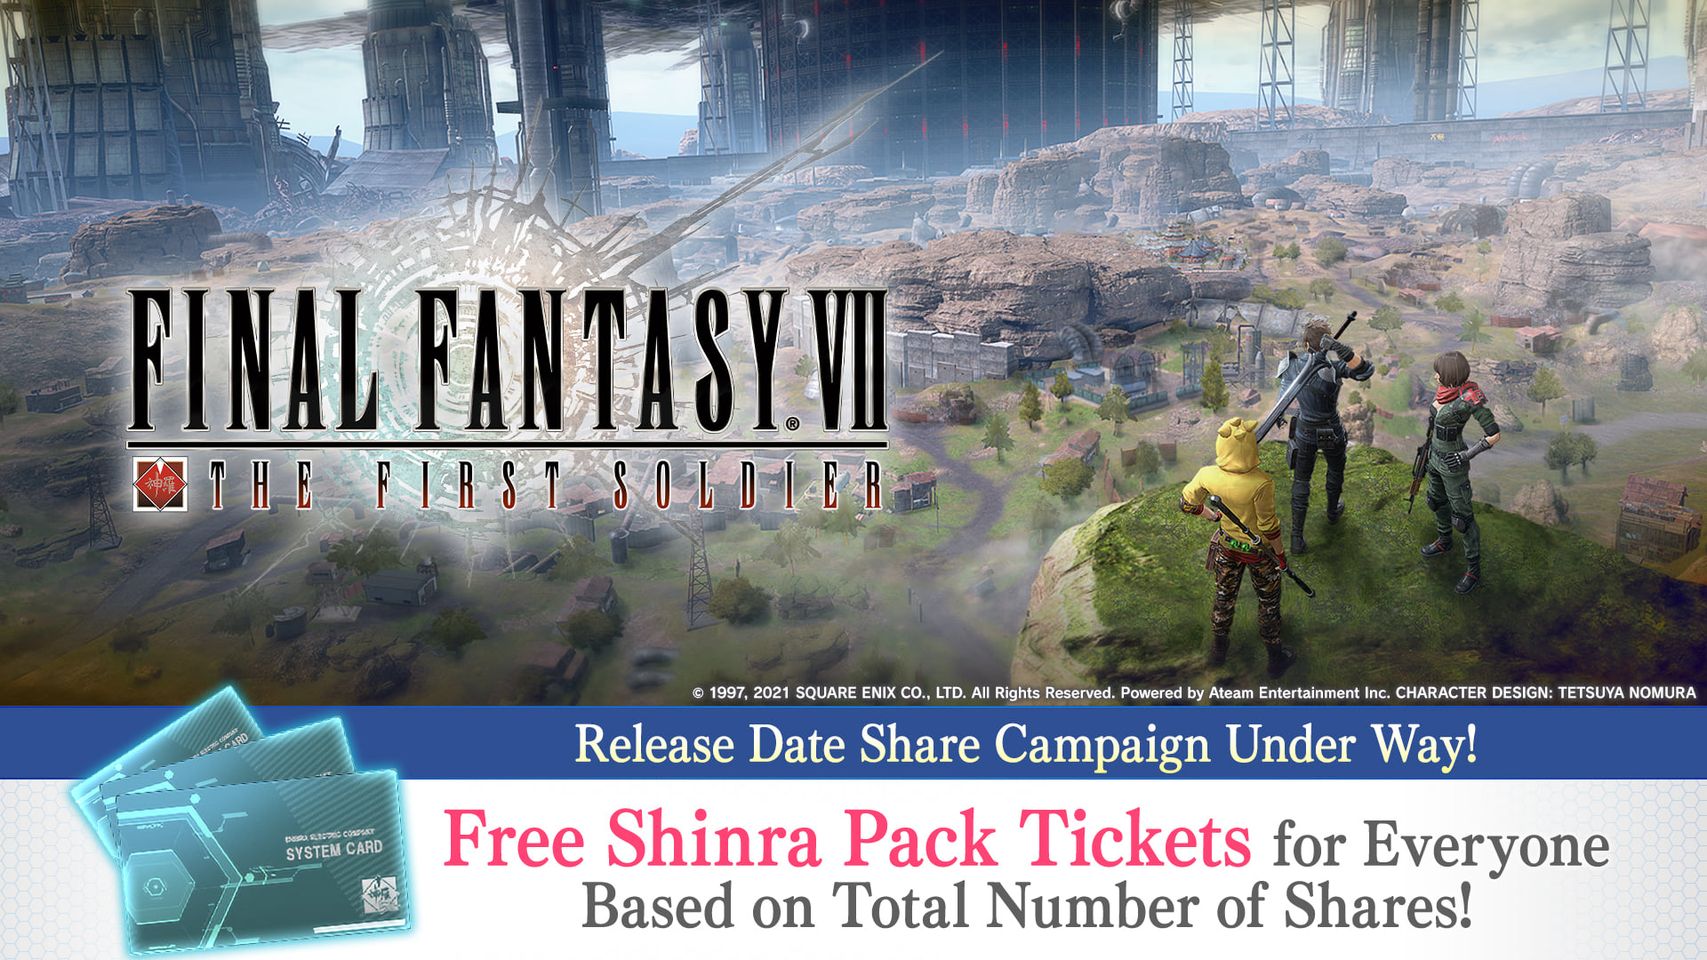 Final Fantasy VII The First Soldier : Release Date & Share Campaign